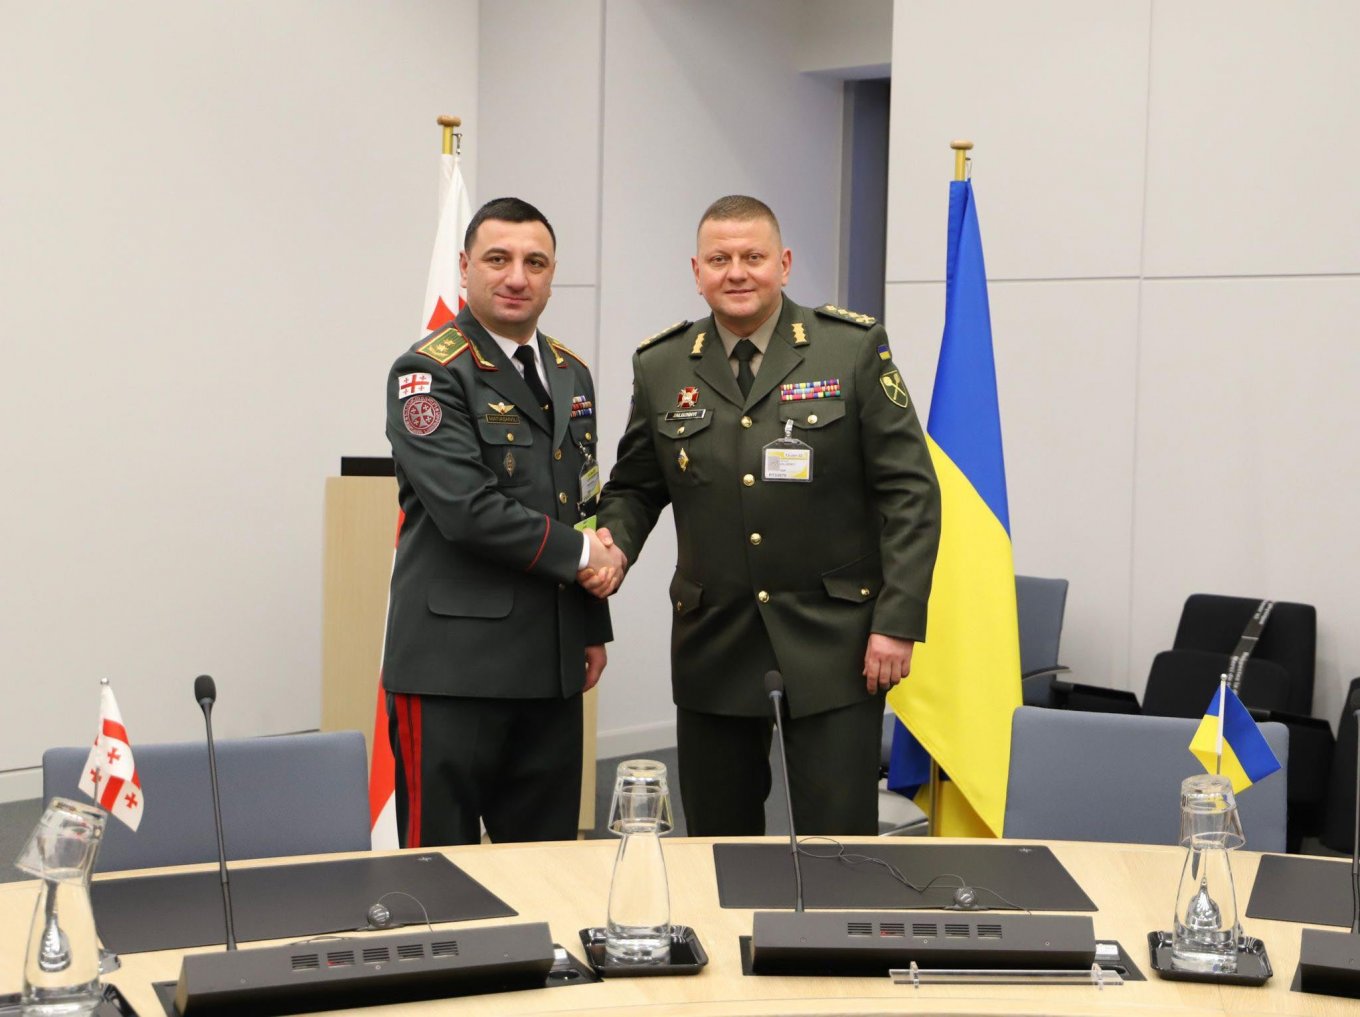 The the security of the Azov-Black Sea region was touched upon during the talks with the Georgian side, Lieutenant General Valeriy Zaluzhnyi about the readiness of the Armed Forces of Ukraine to respond to the Kremlin's insane scenarios, Defense Express